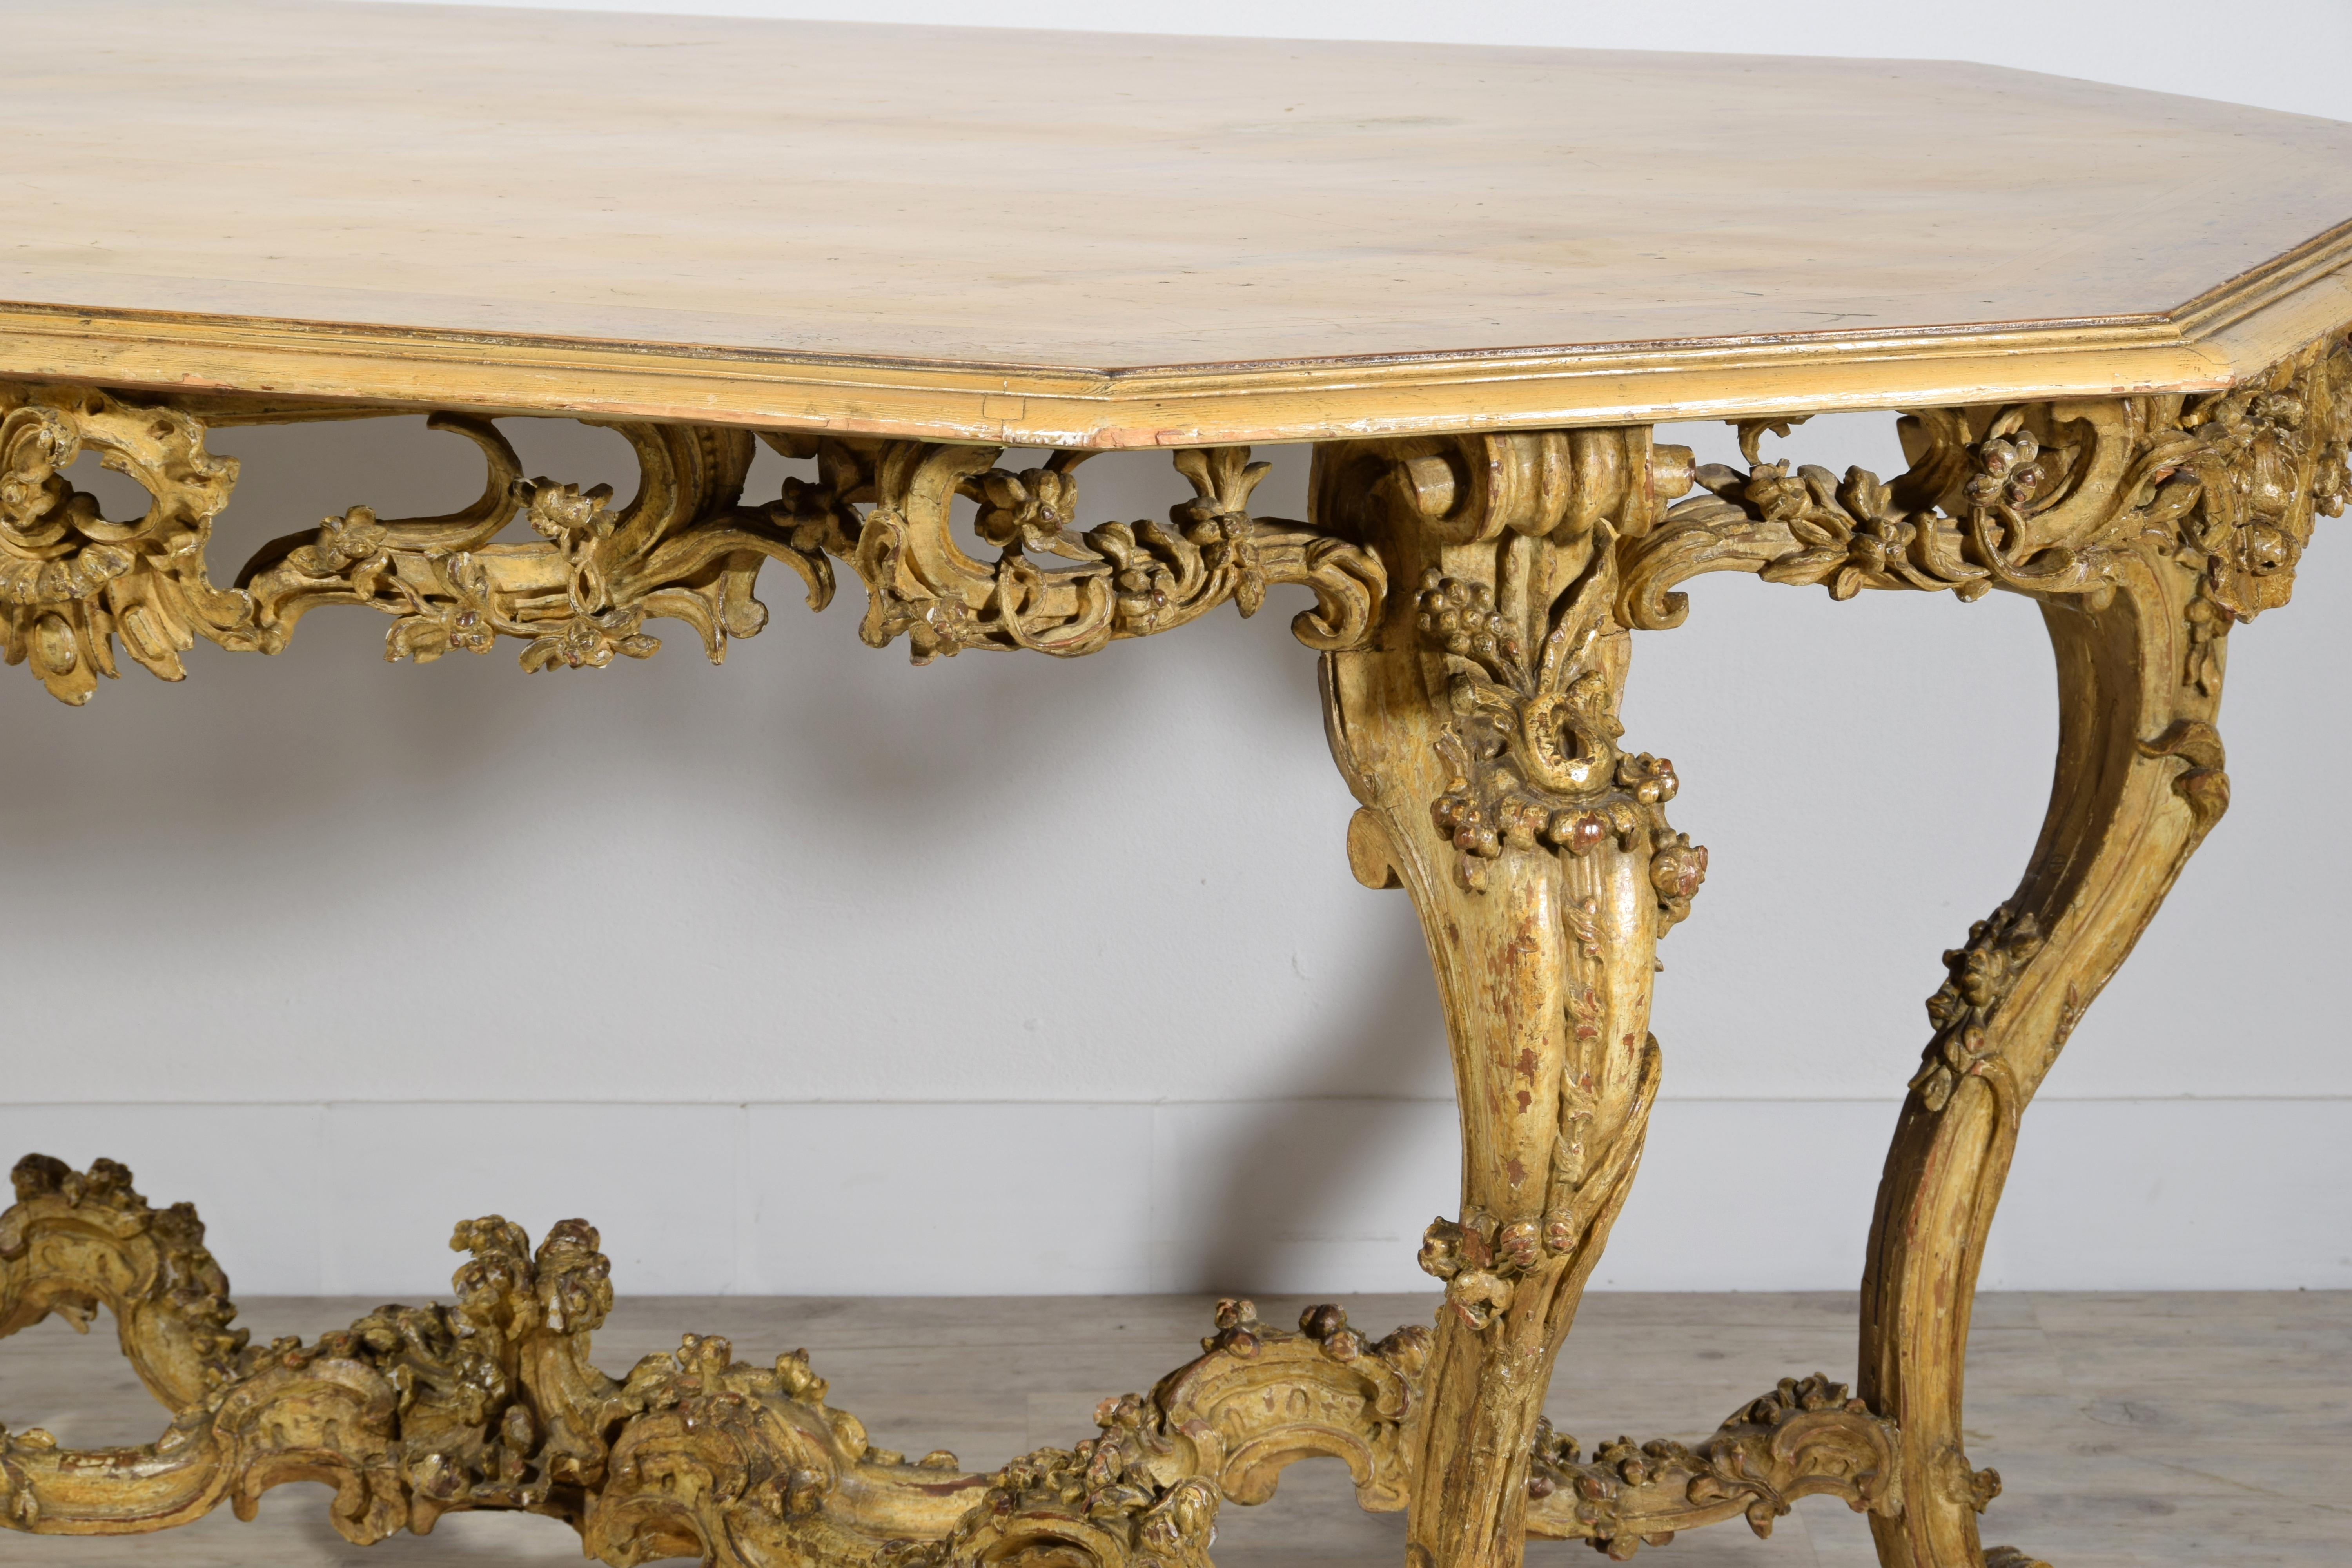 Italian Baroque Carved Gilt and Lacquered Wood Center Table, 18th Century 17